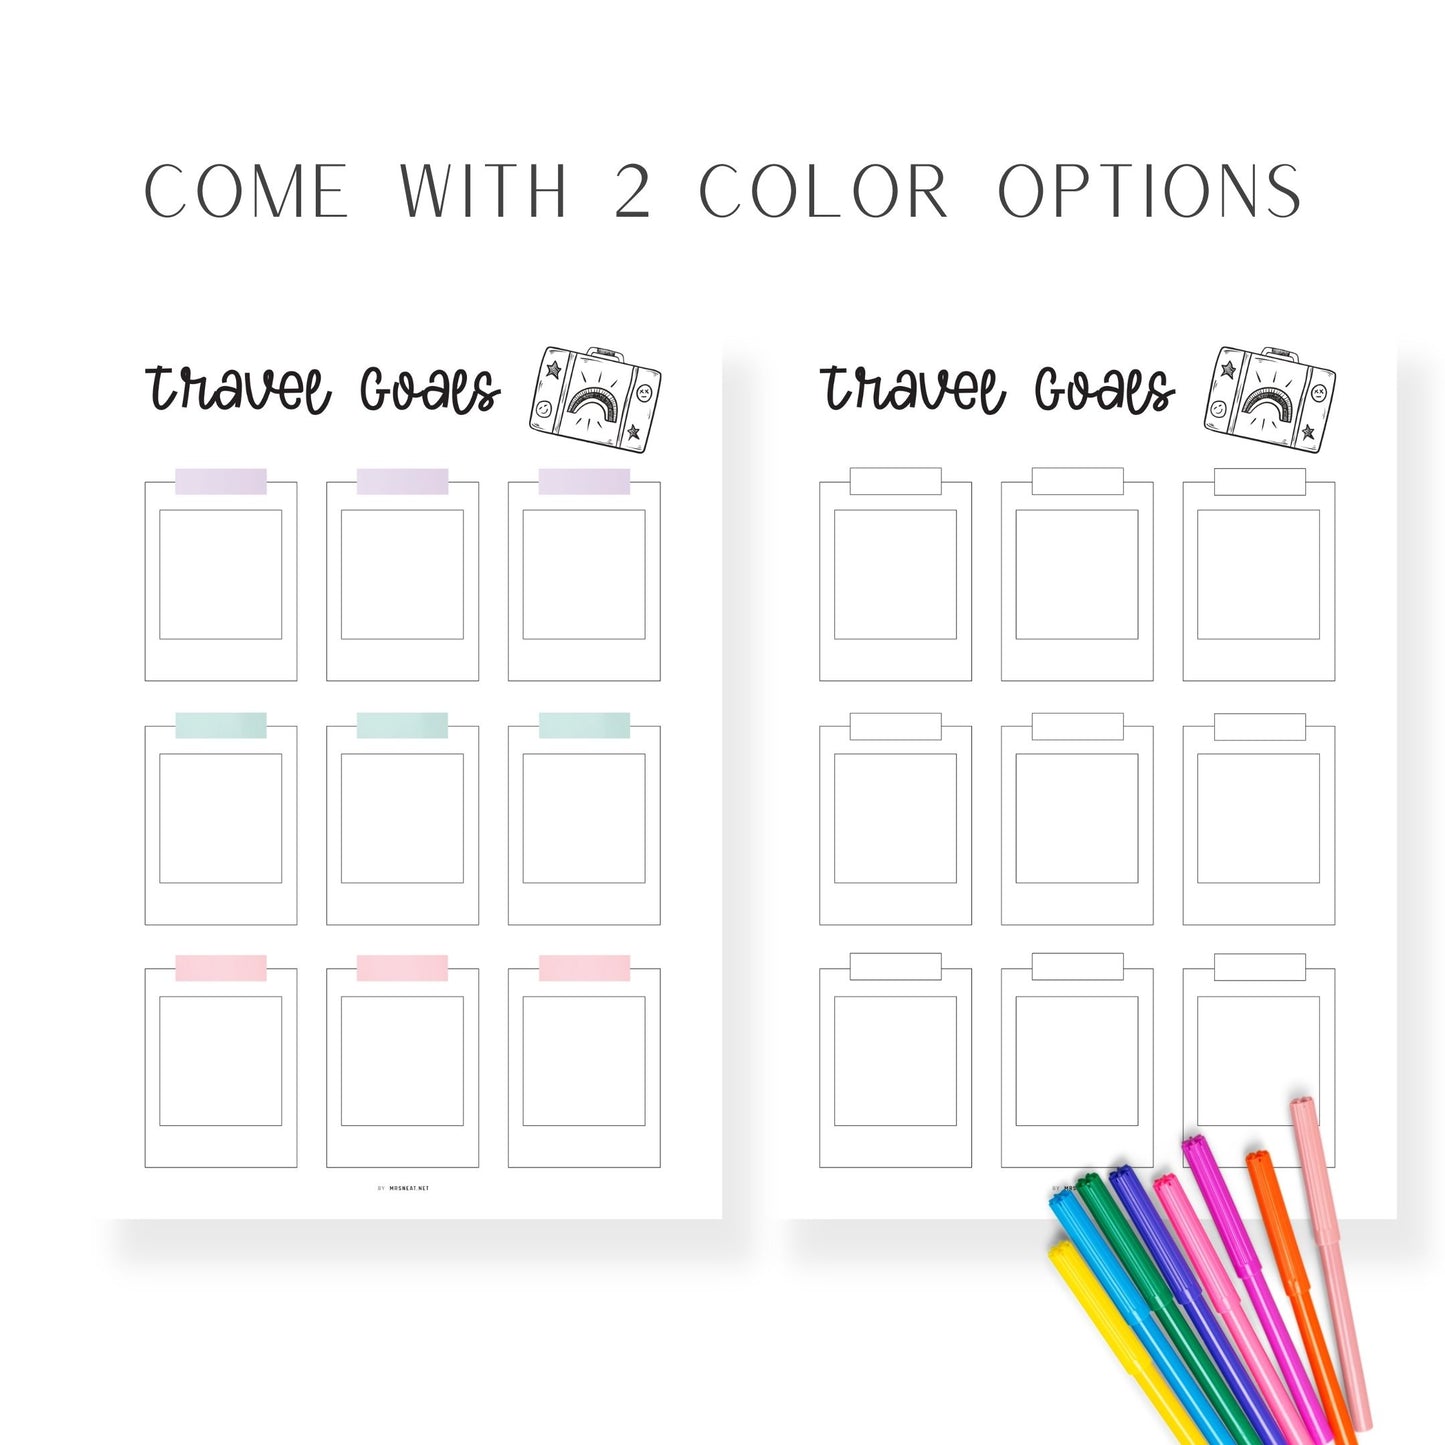 Colorful Travel Goals Planner Template